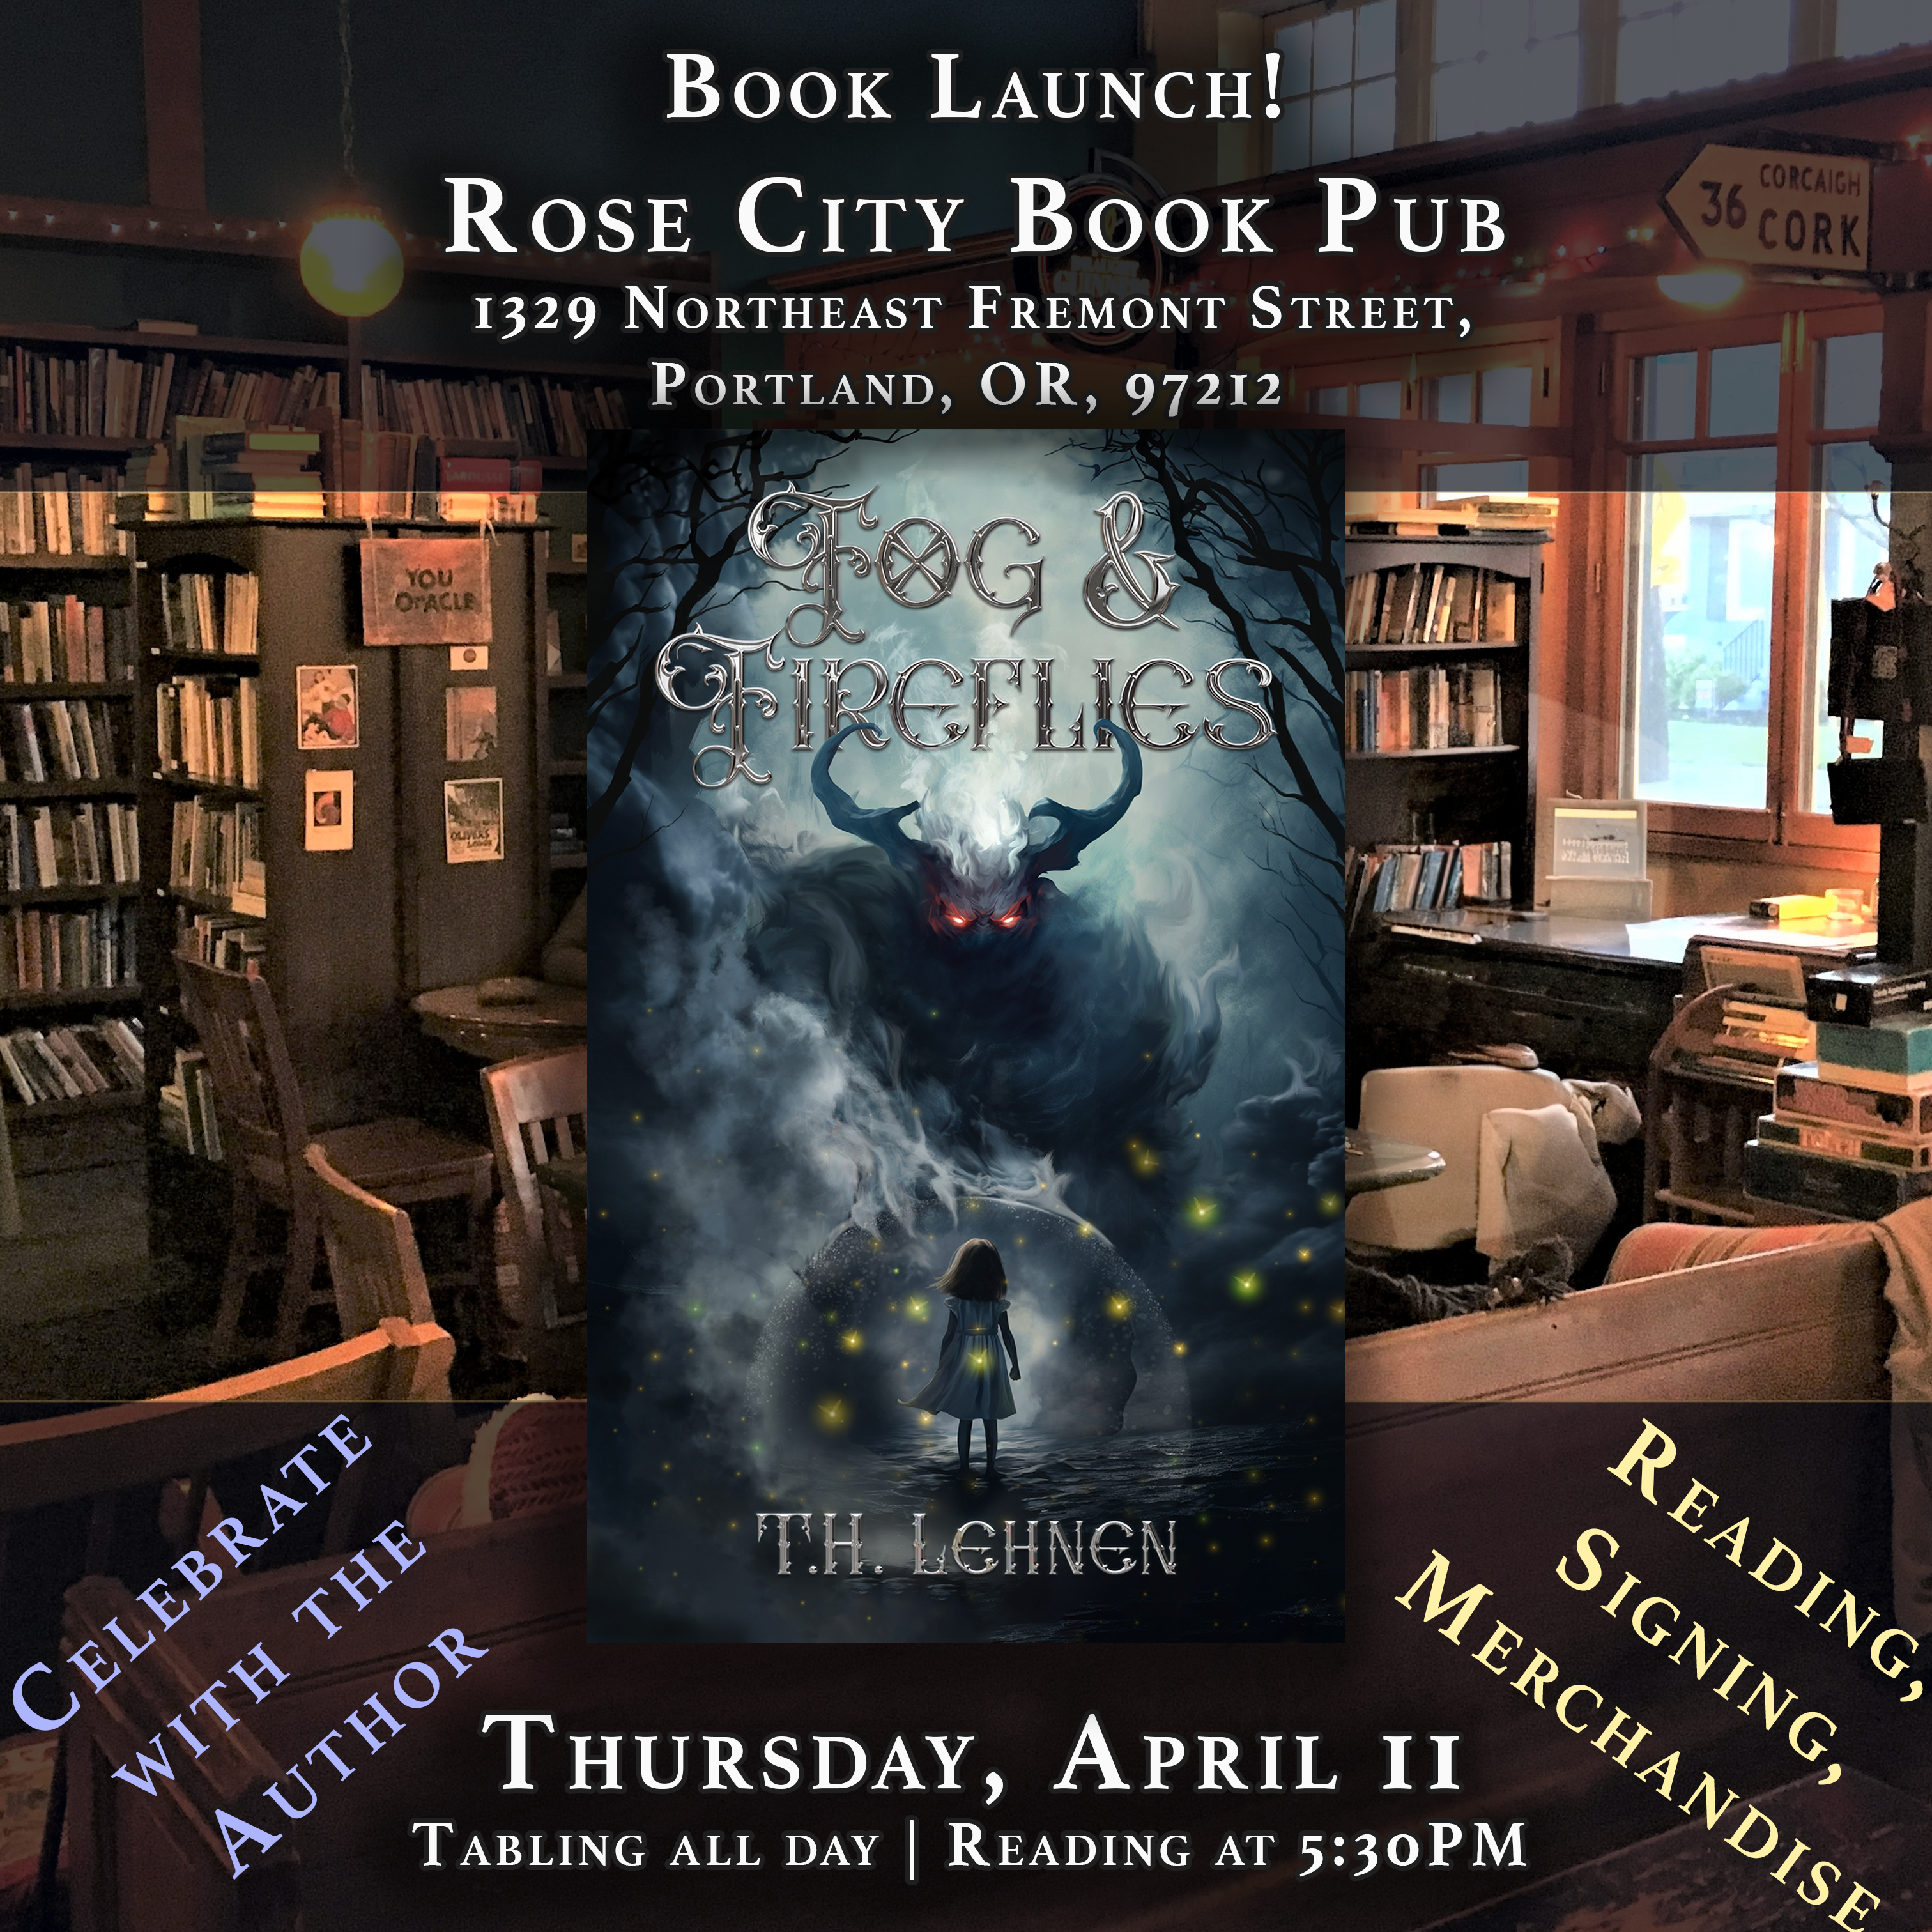 Launch event for Fog & Fireflies at Rose City Book Pub on April 11